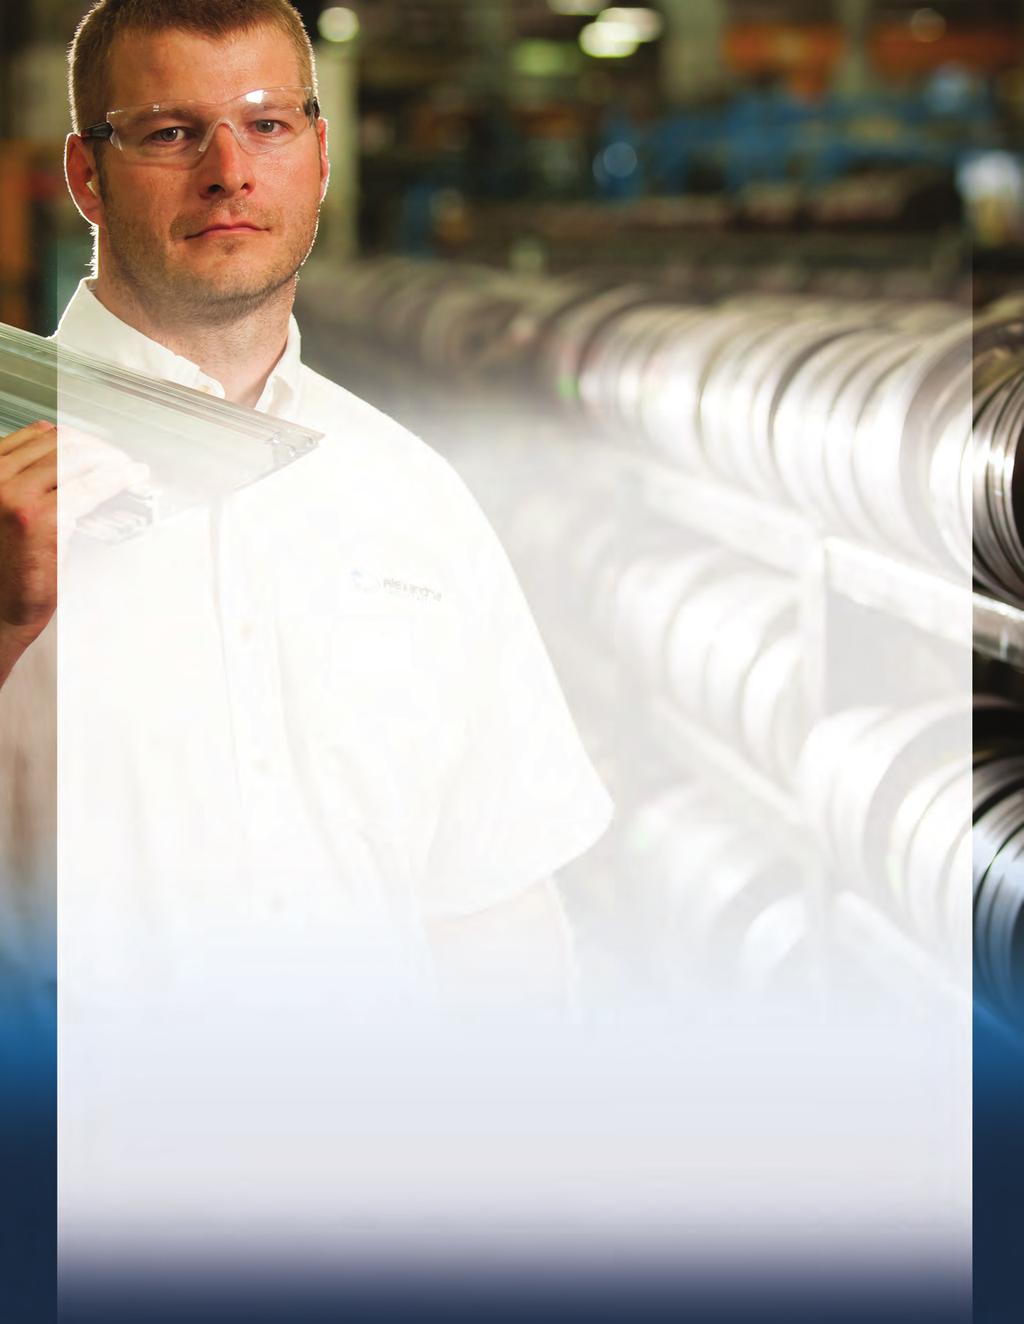 When it comes to engineered product design and precision manufacturing, Alexandria Industries is highly recognized for exceeding industry standards, advanced engineering and process ingenuity.